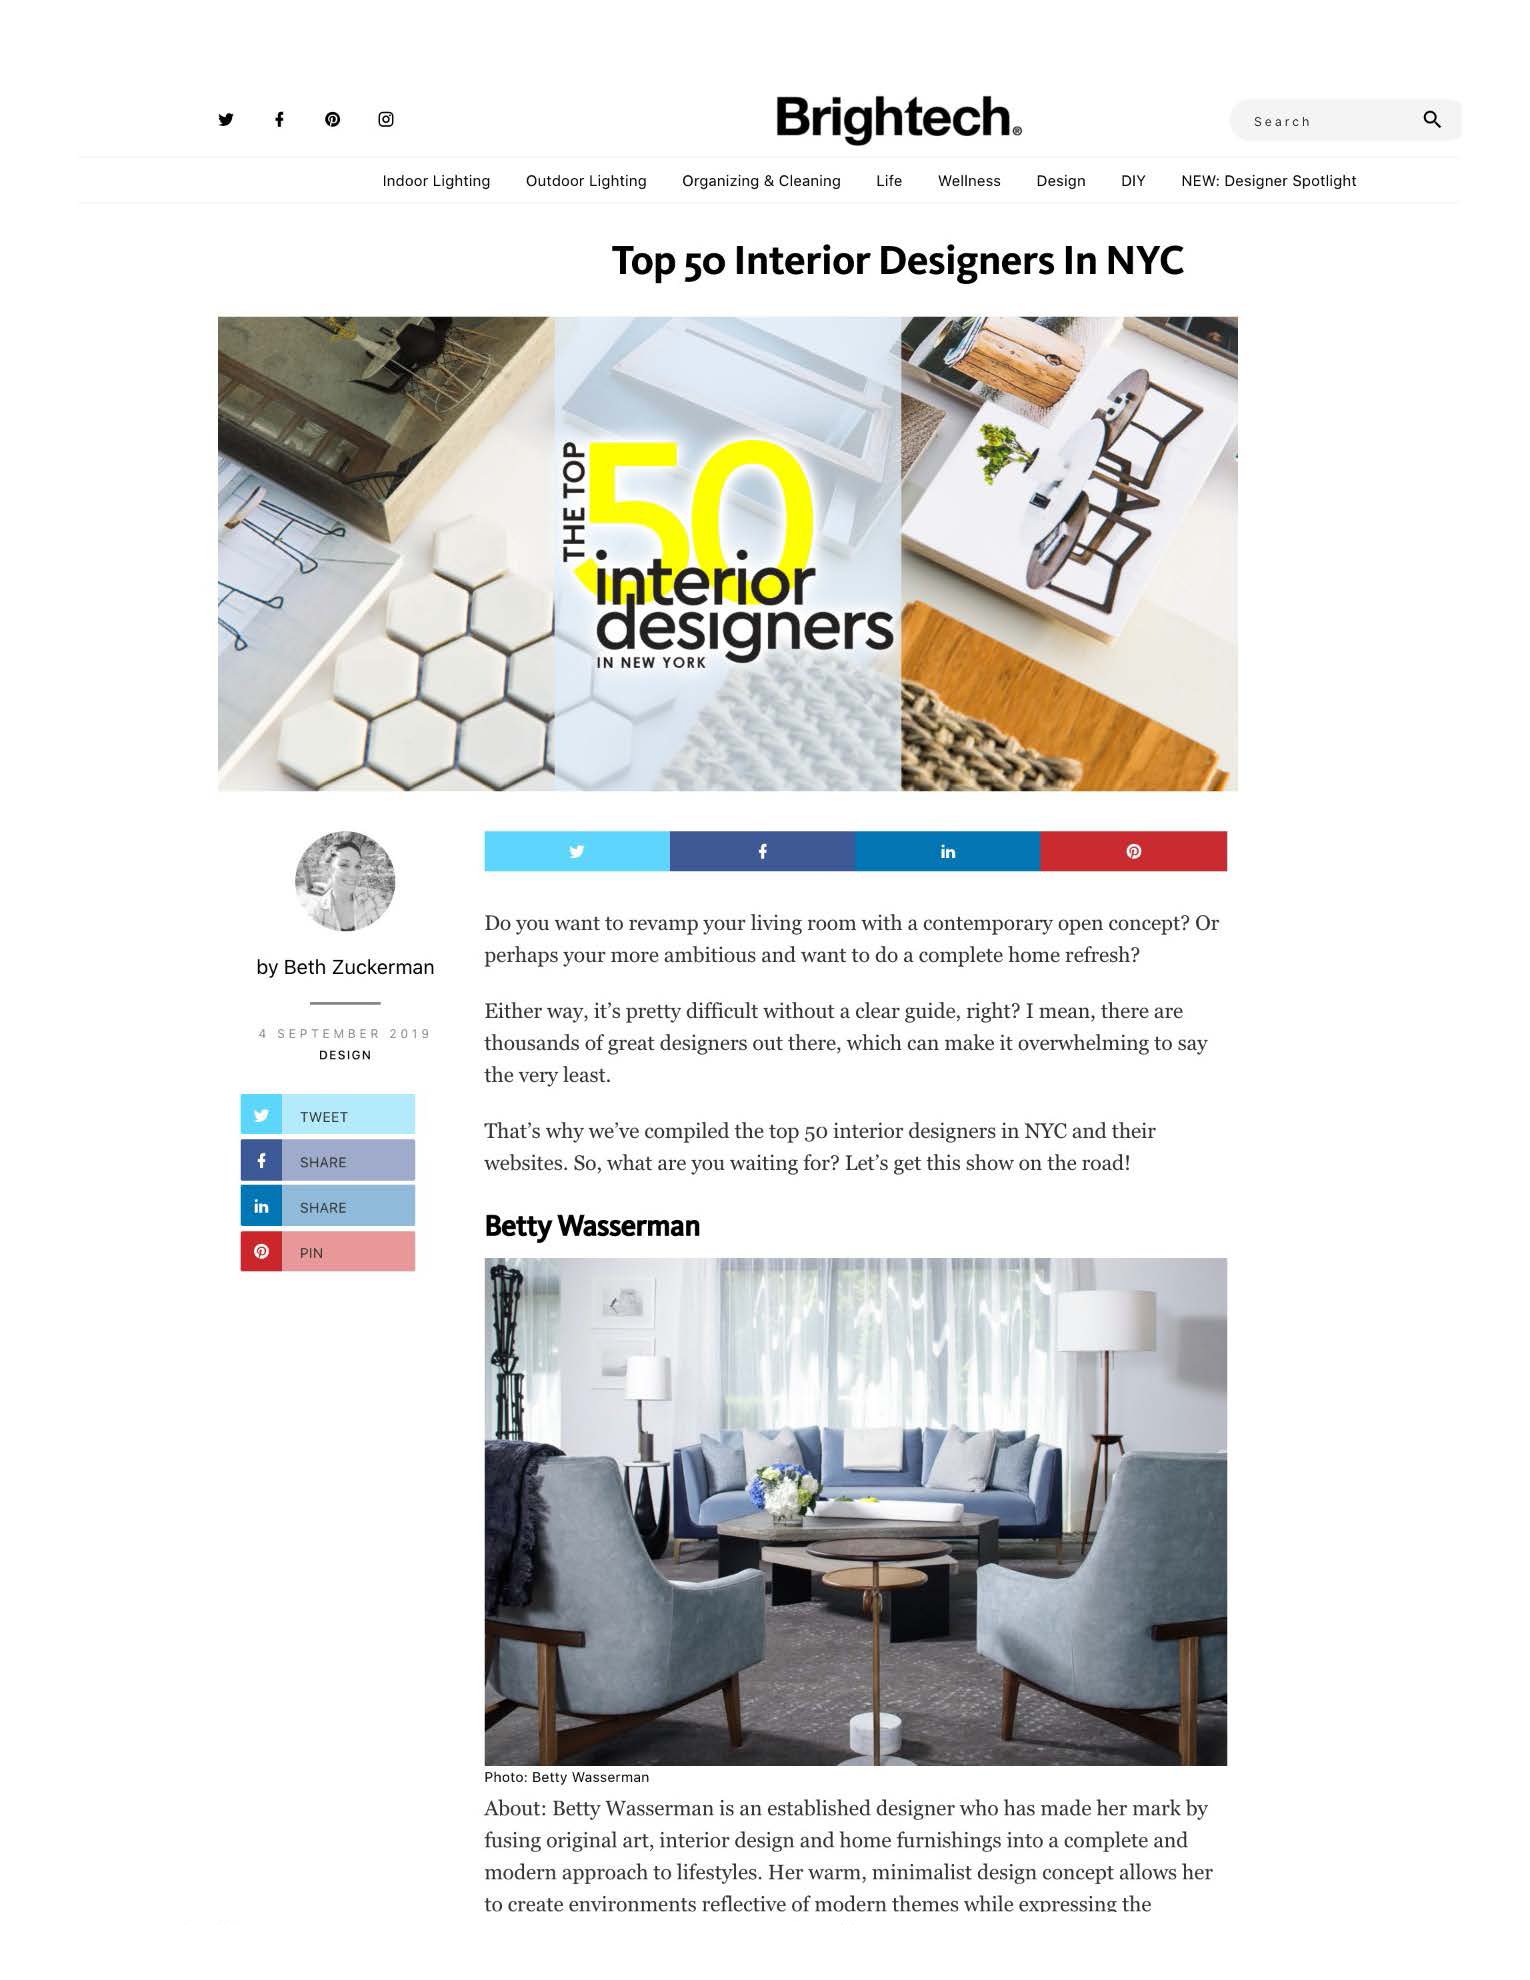 Top 50 Interior Designers In NYC - Brightech Blog_Page_01.jpg